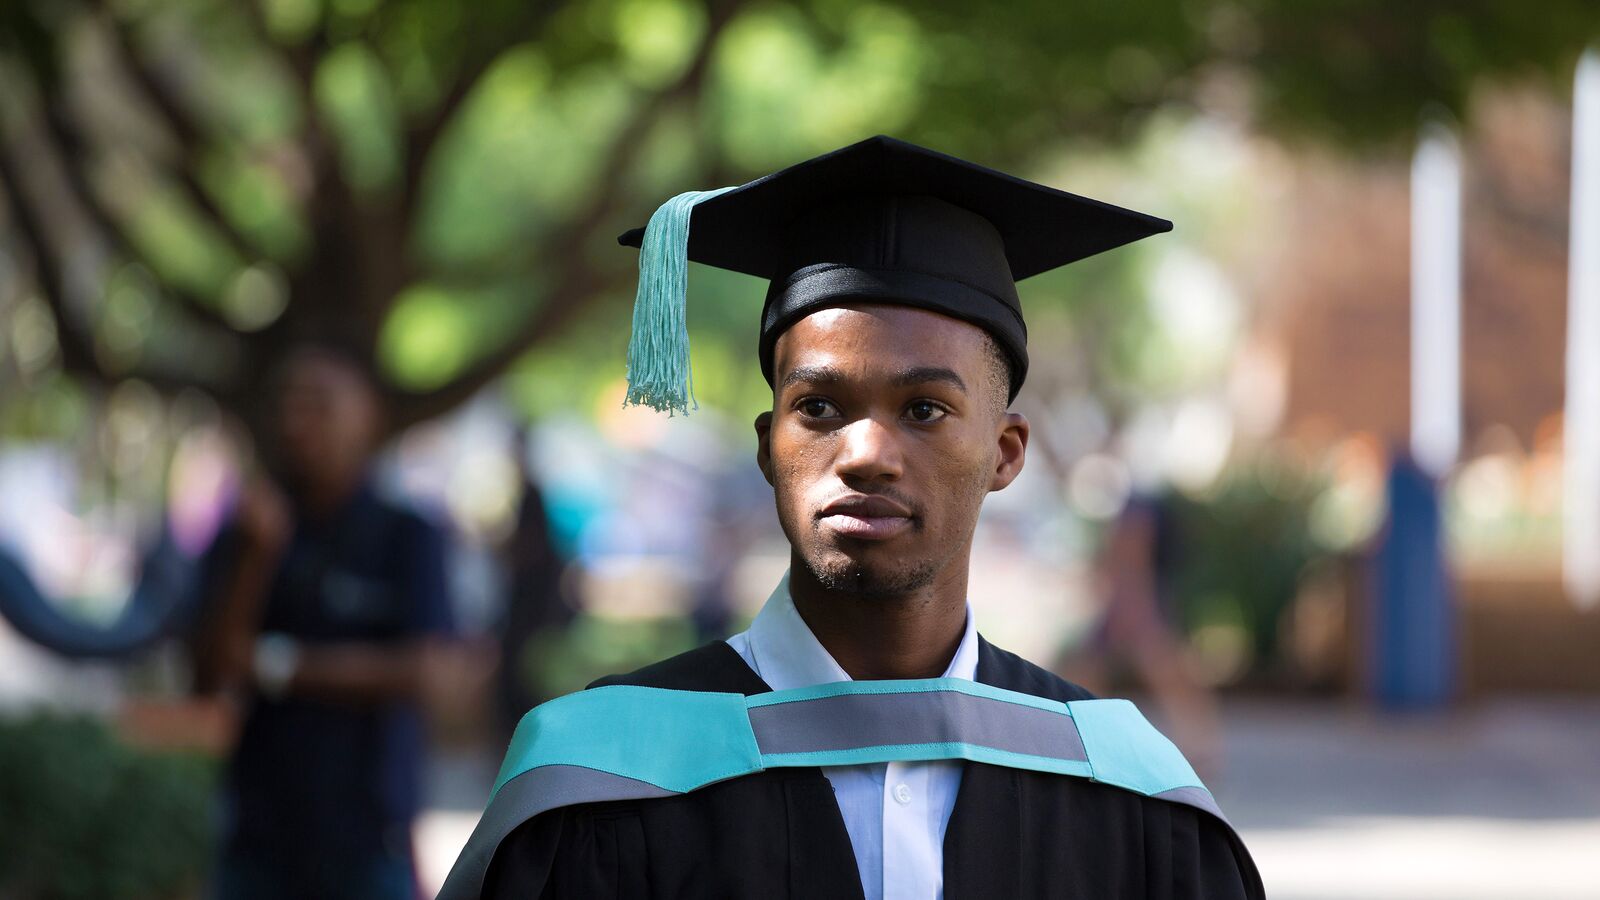 A student in South Africa stands outside in his graduation regalia